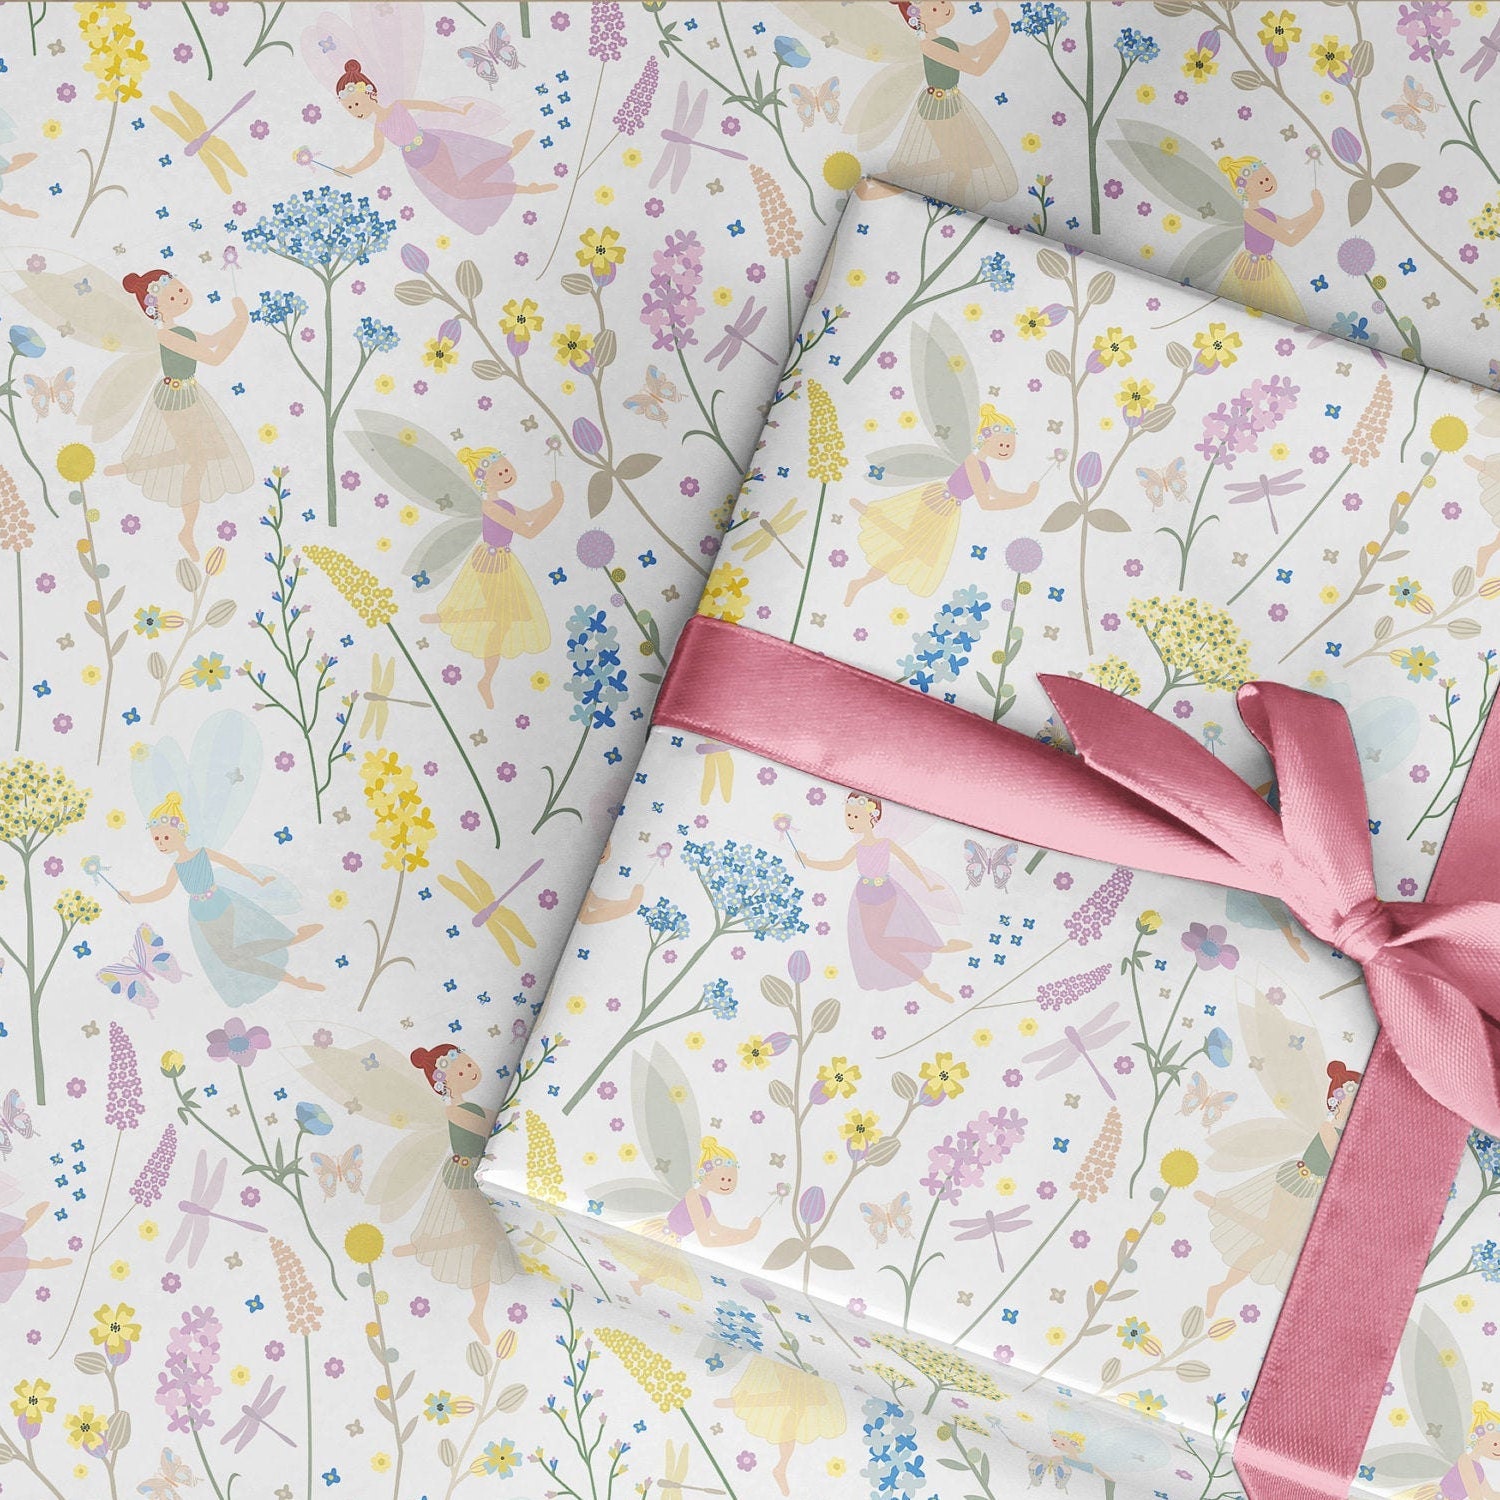 Wrapping Paper Roll, Fairy birthday, Fairy flower gift wrapping